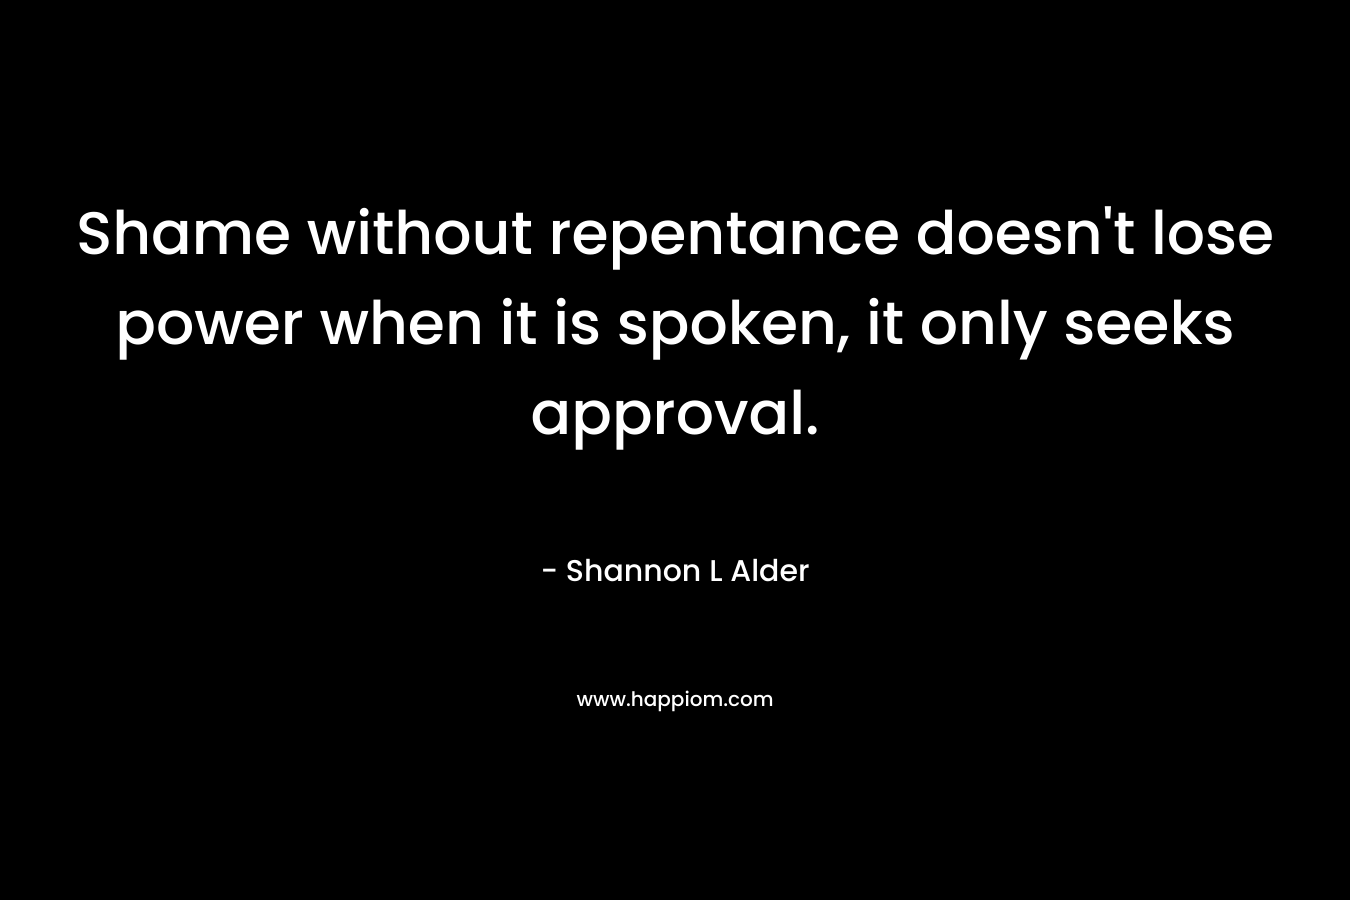 Shame without repentance doesn't lose power when it is spoken, it only seeks approval.